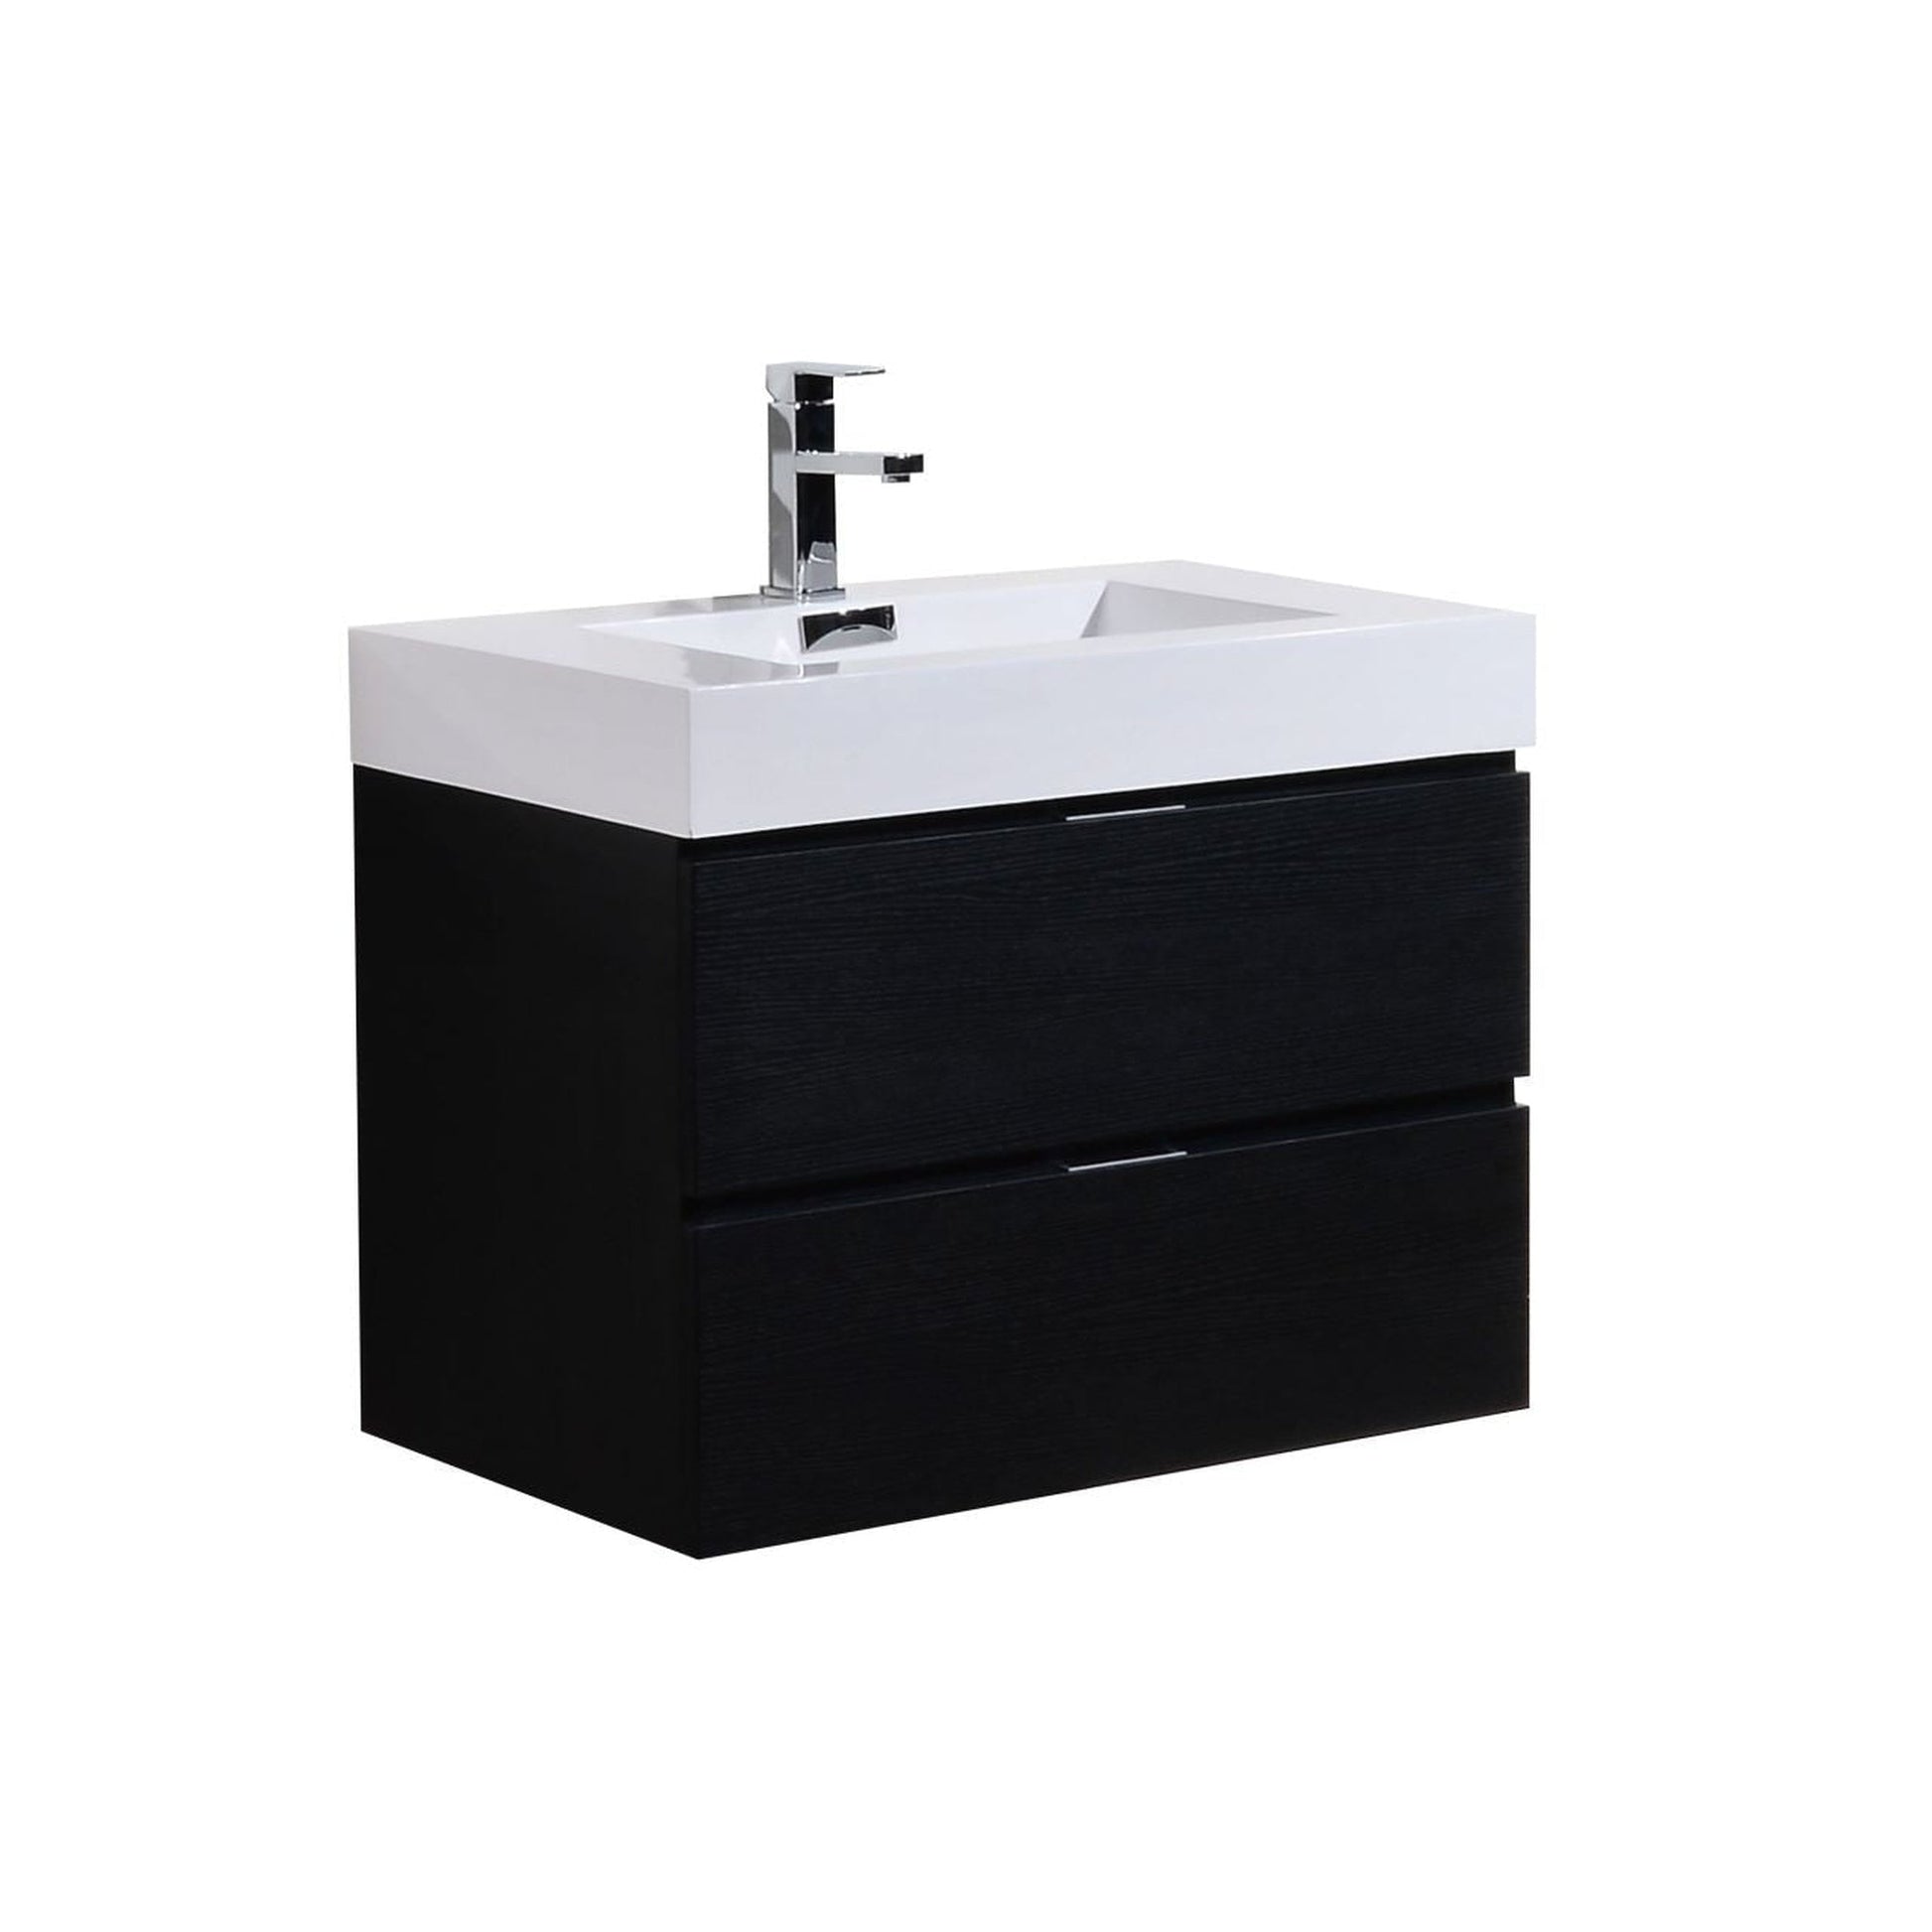 KubeBath Bliss 30" Black Wall-Mounted Modern Bathroom Vanity With Single Integrated Acrylic Sink With Overflow and 28" Black Framed Mirror With Shelf